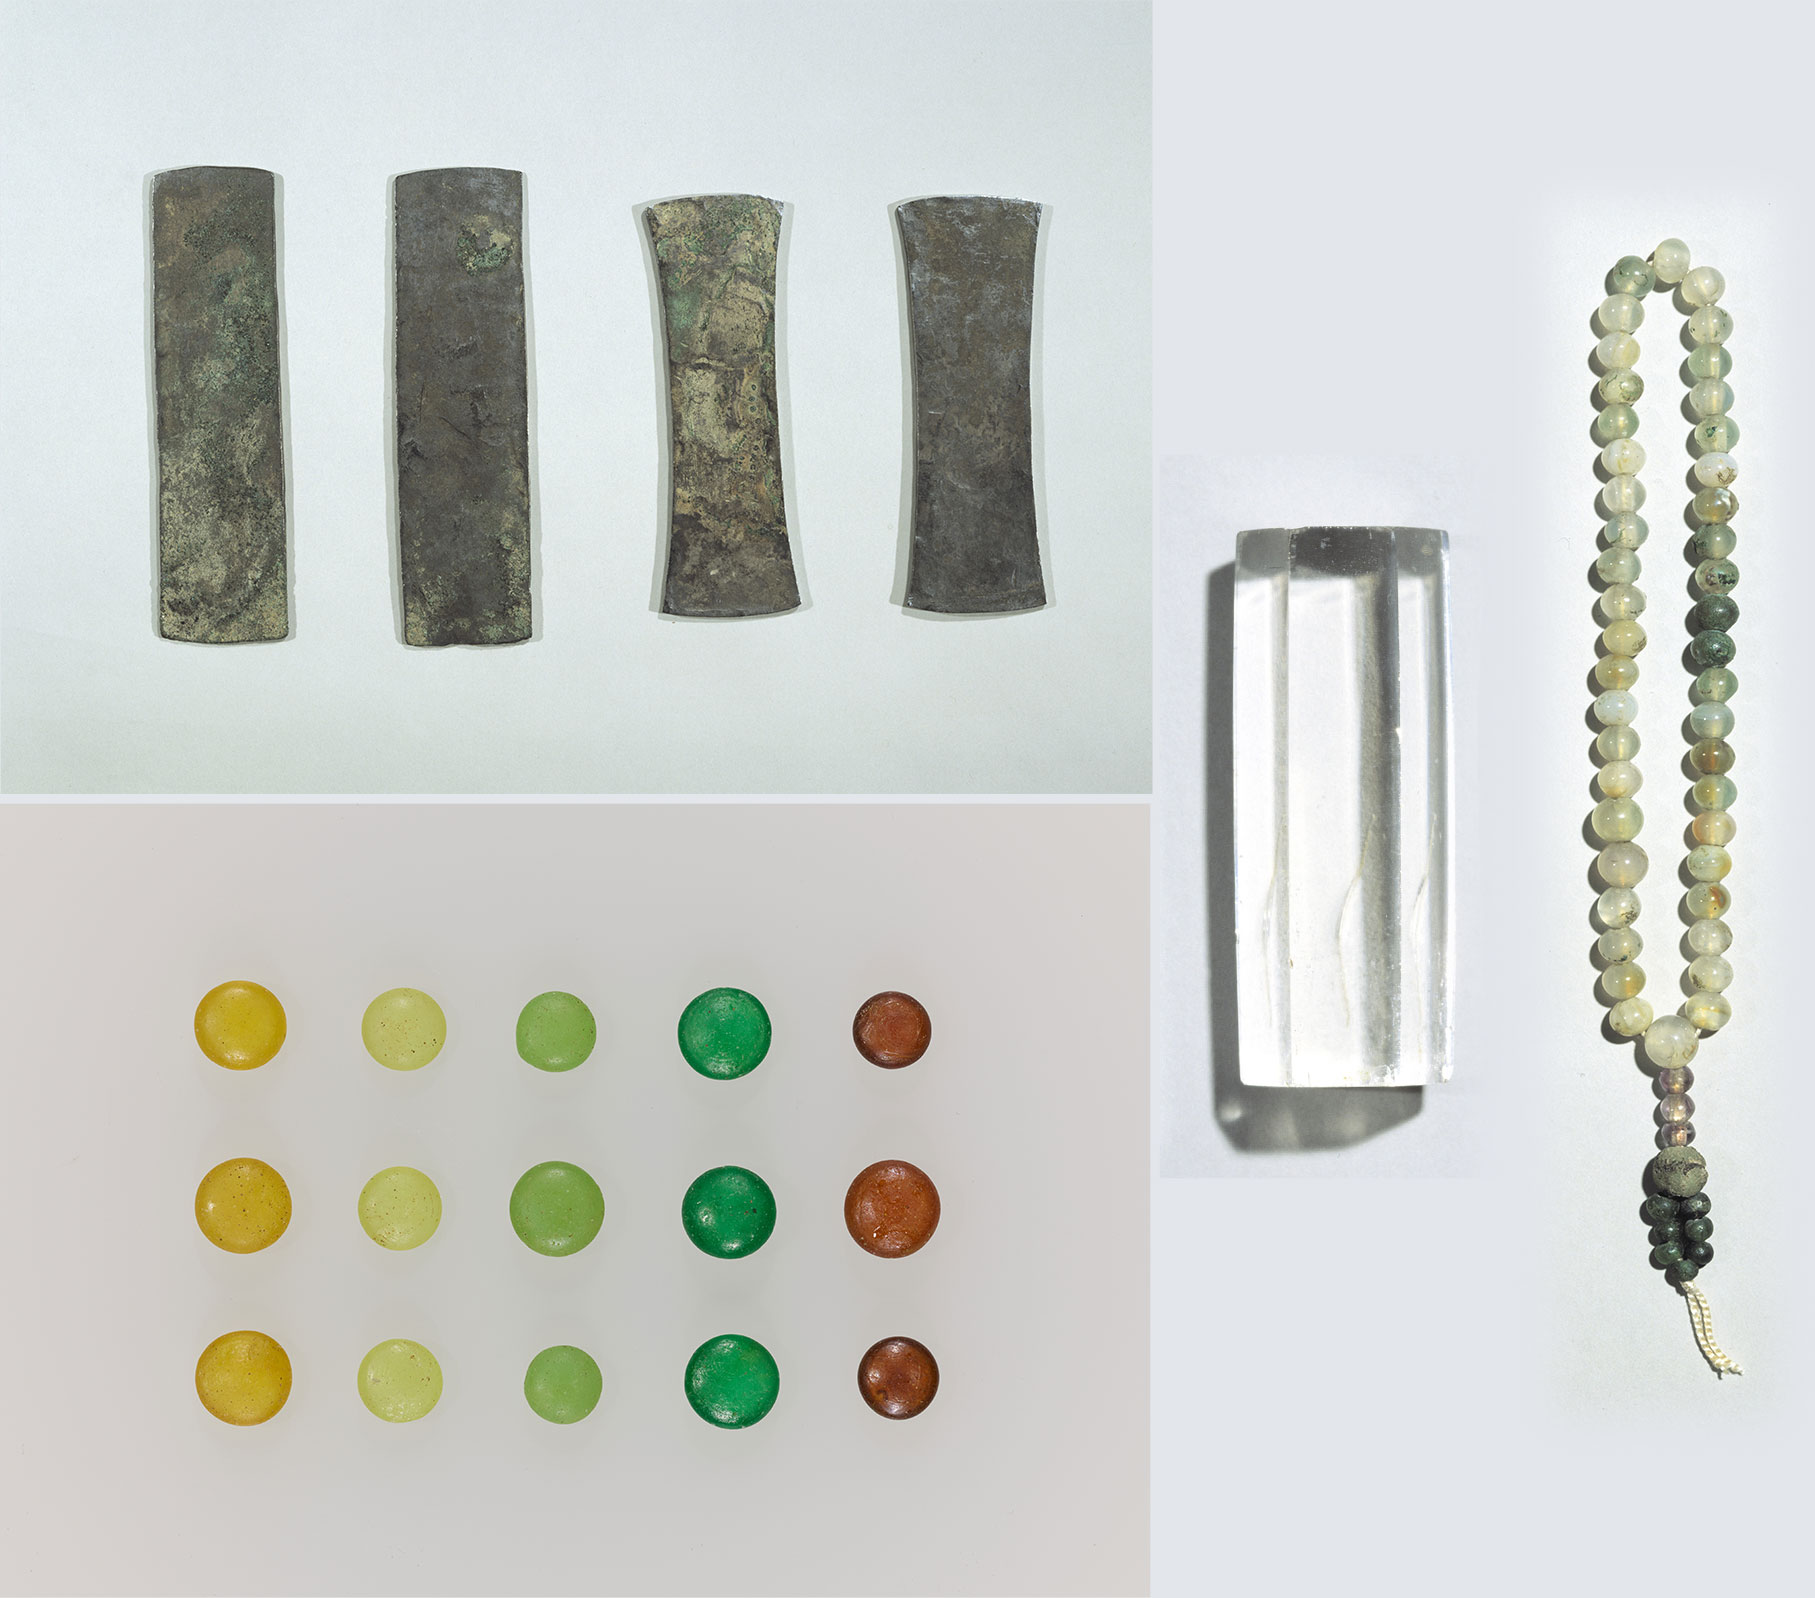 National Treasure Ritual objects buried in consecration of the building site of the Central Golden Hall, Kofukuji Temple Silver ingots, Glass beads, Hexagonal crystal column, Agate buddhist rosary